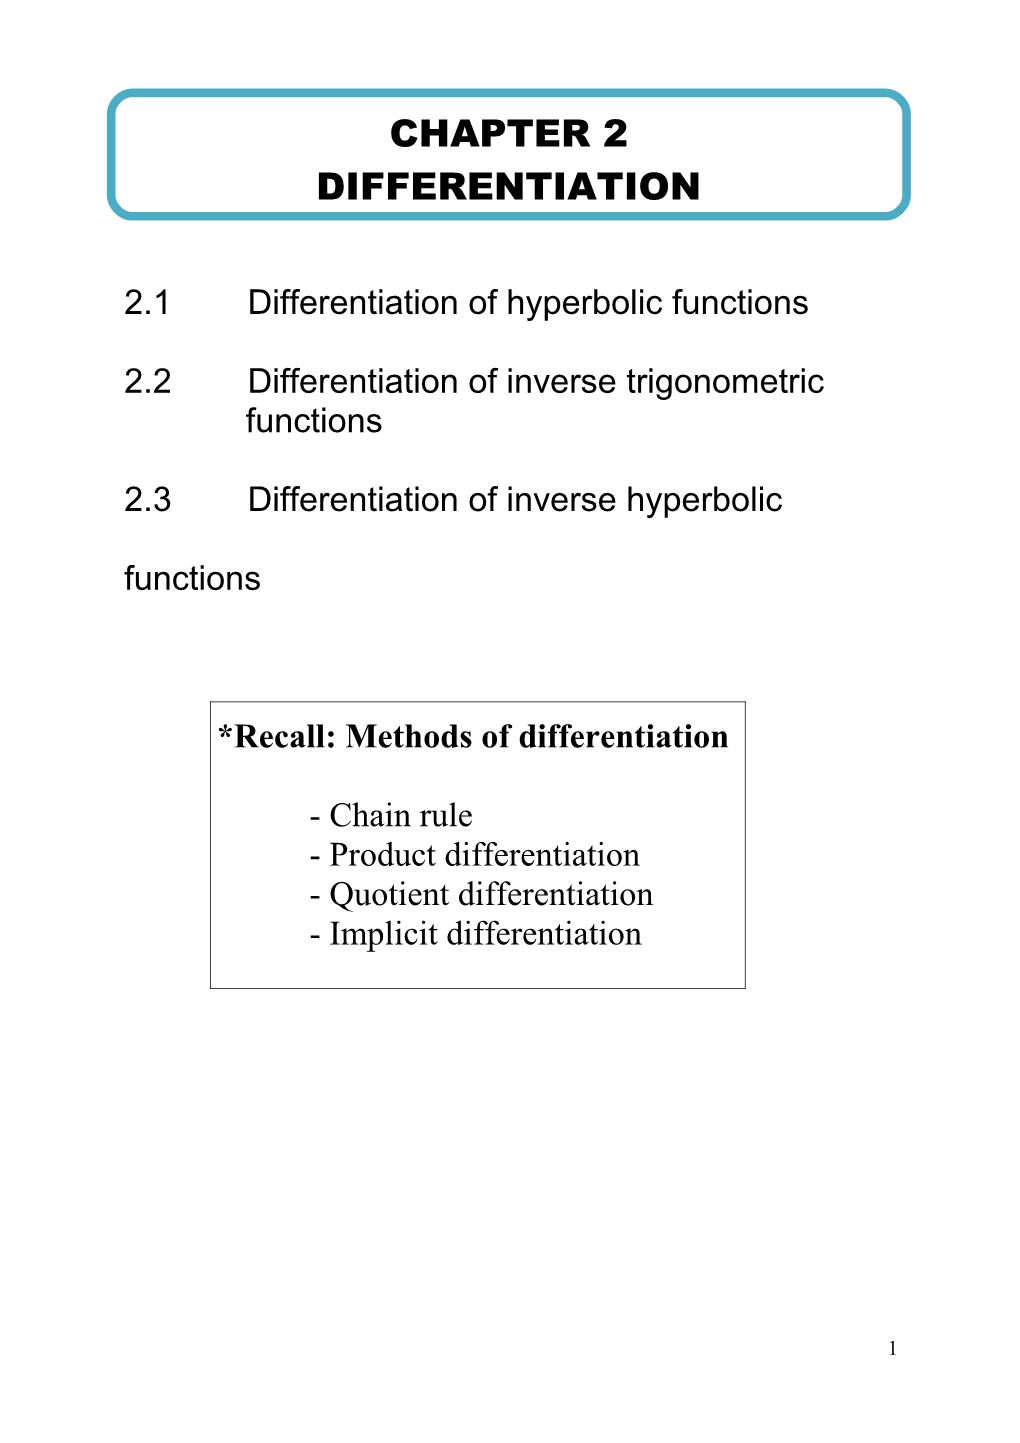 2.1Differentiation of Hyperbolic Functions